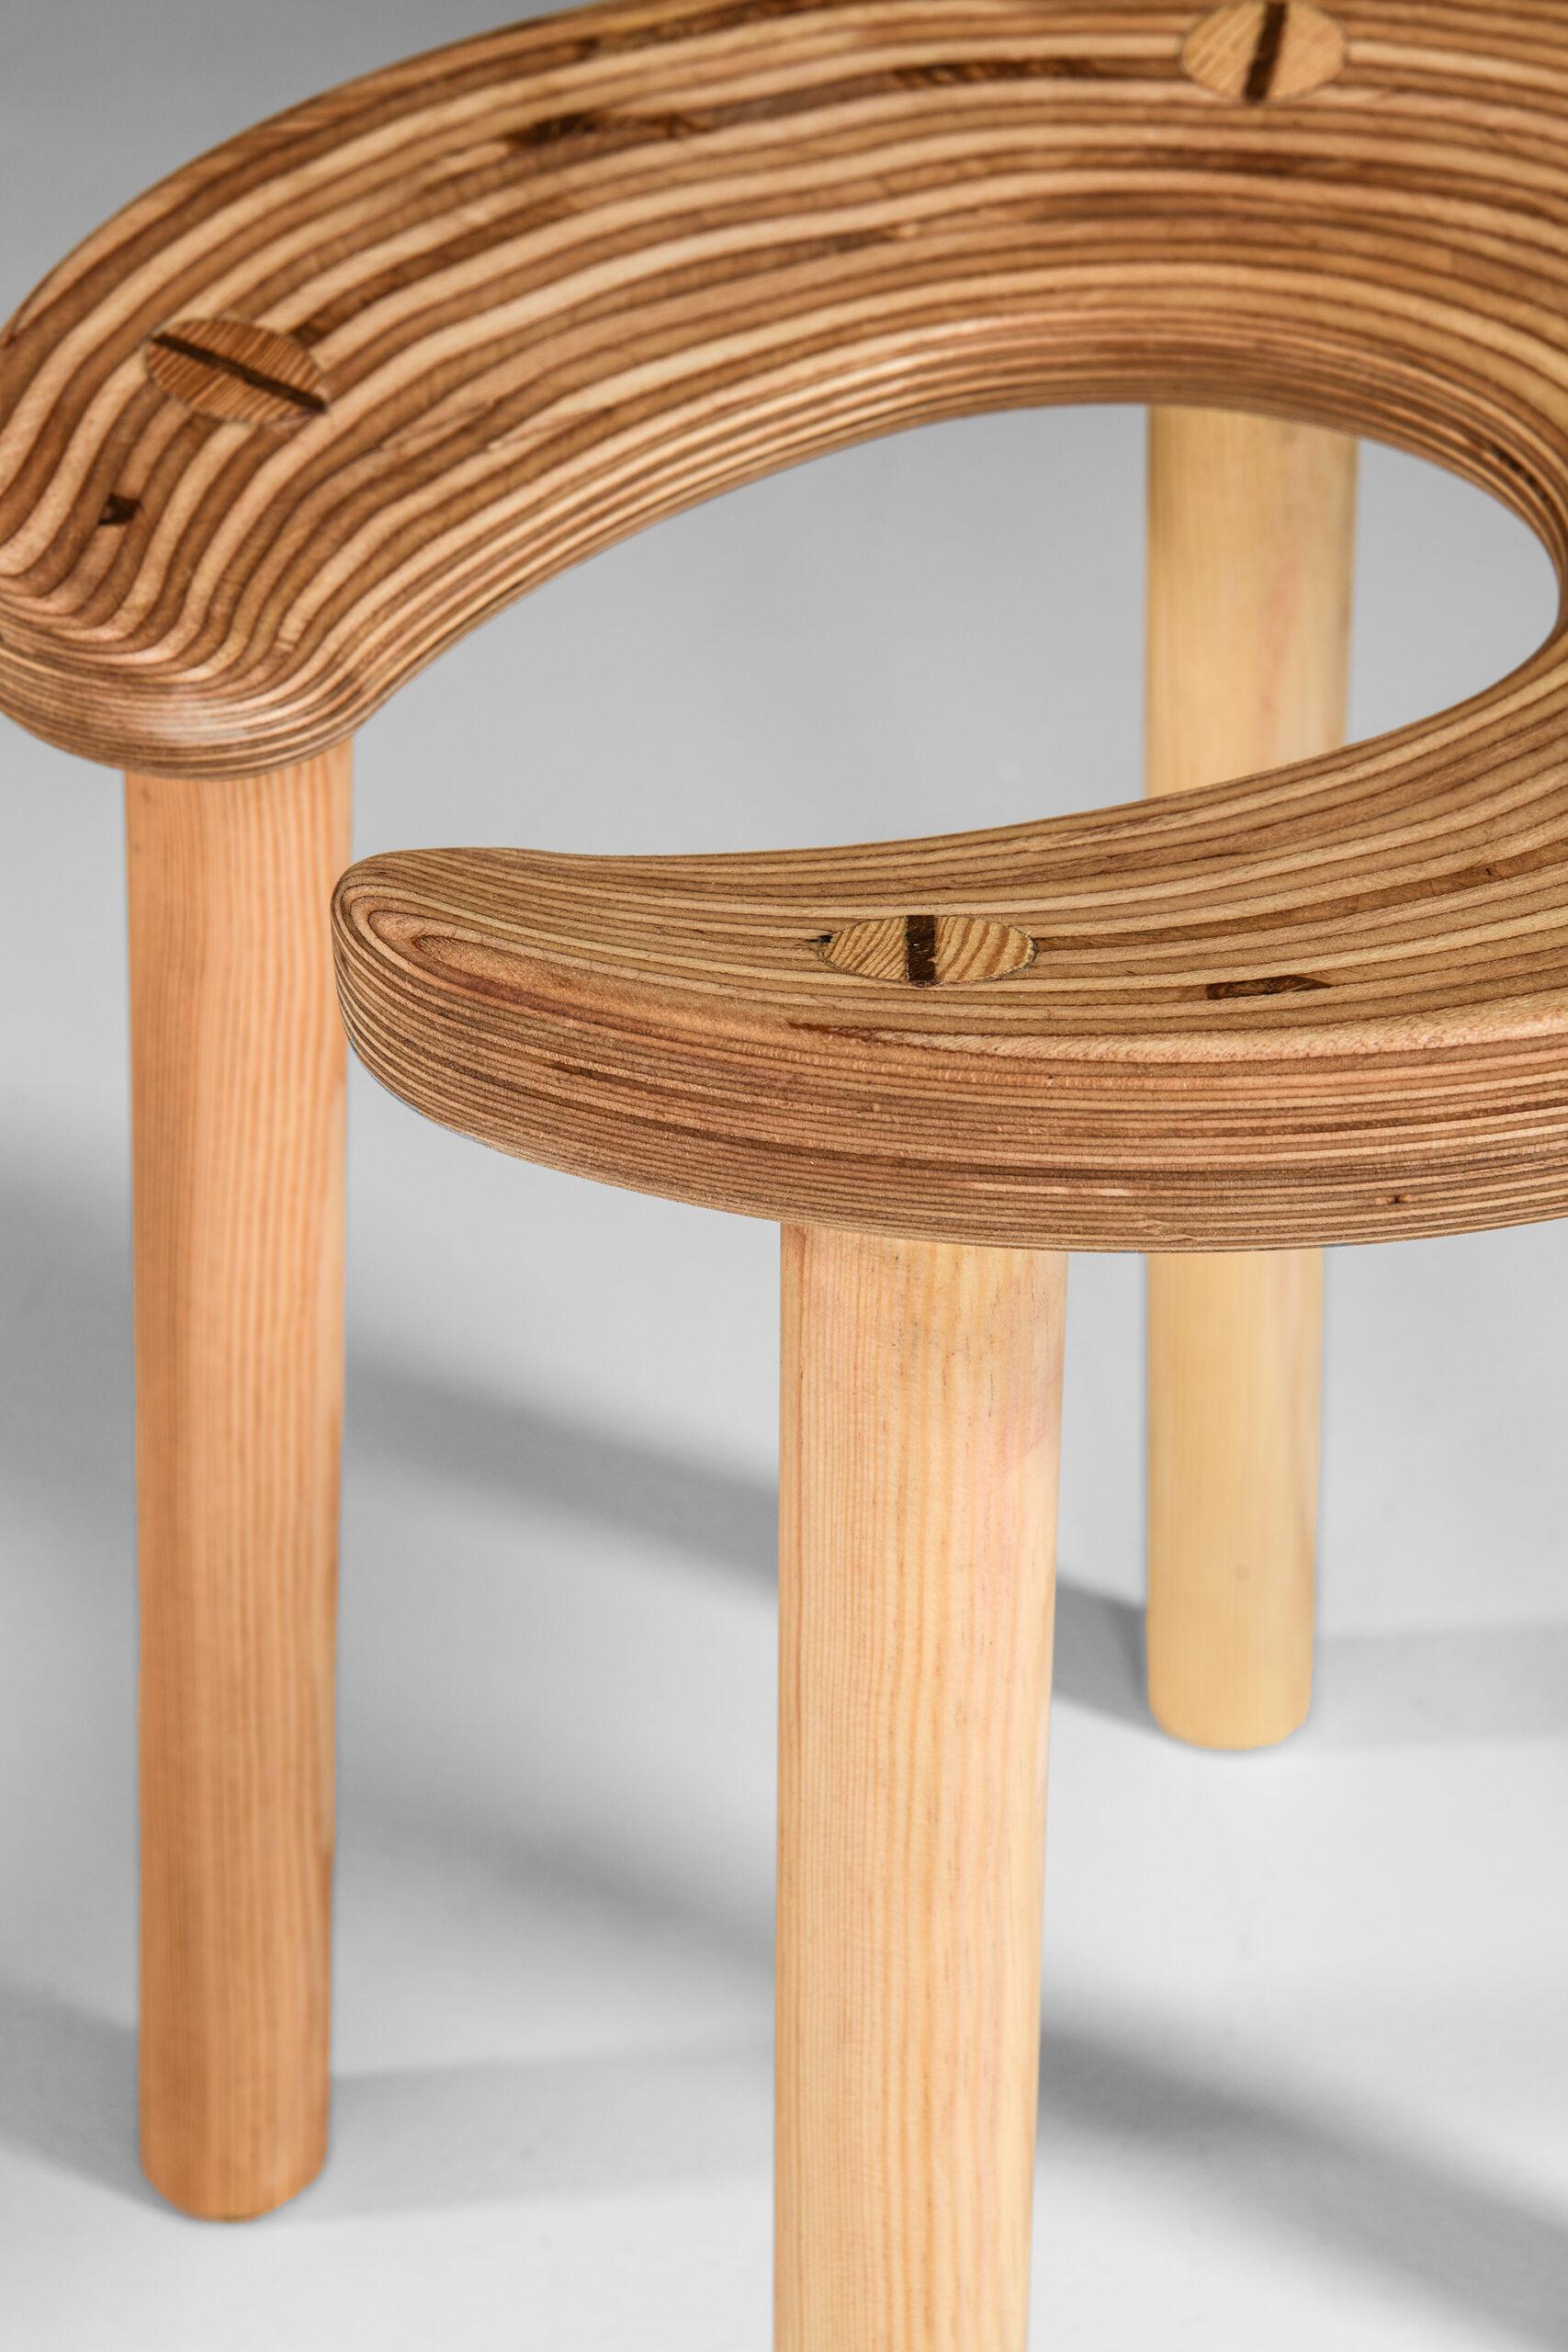 Mid-20th Century Antti Nurmesniemi 'Sauna' Stools Produced in Finland For Sale